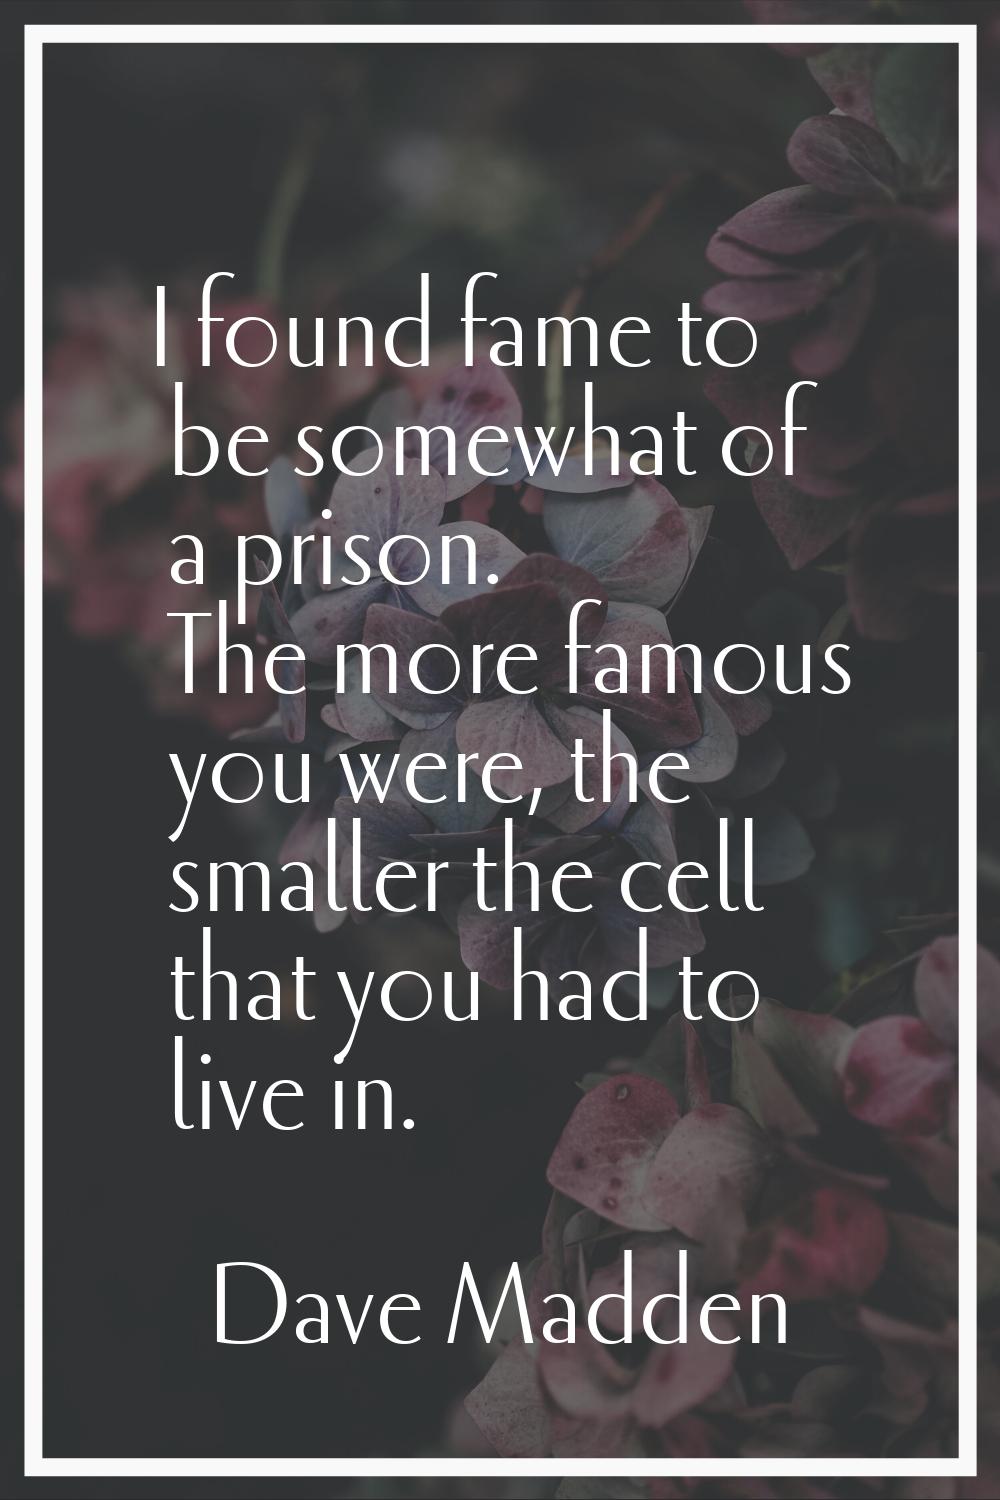 I found fame to be somewhat of a prison. The more famous you were, the smaller the cell that you ha